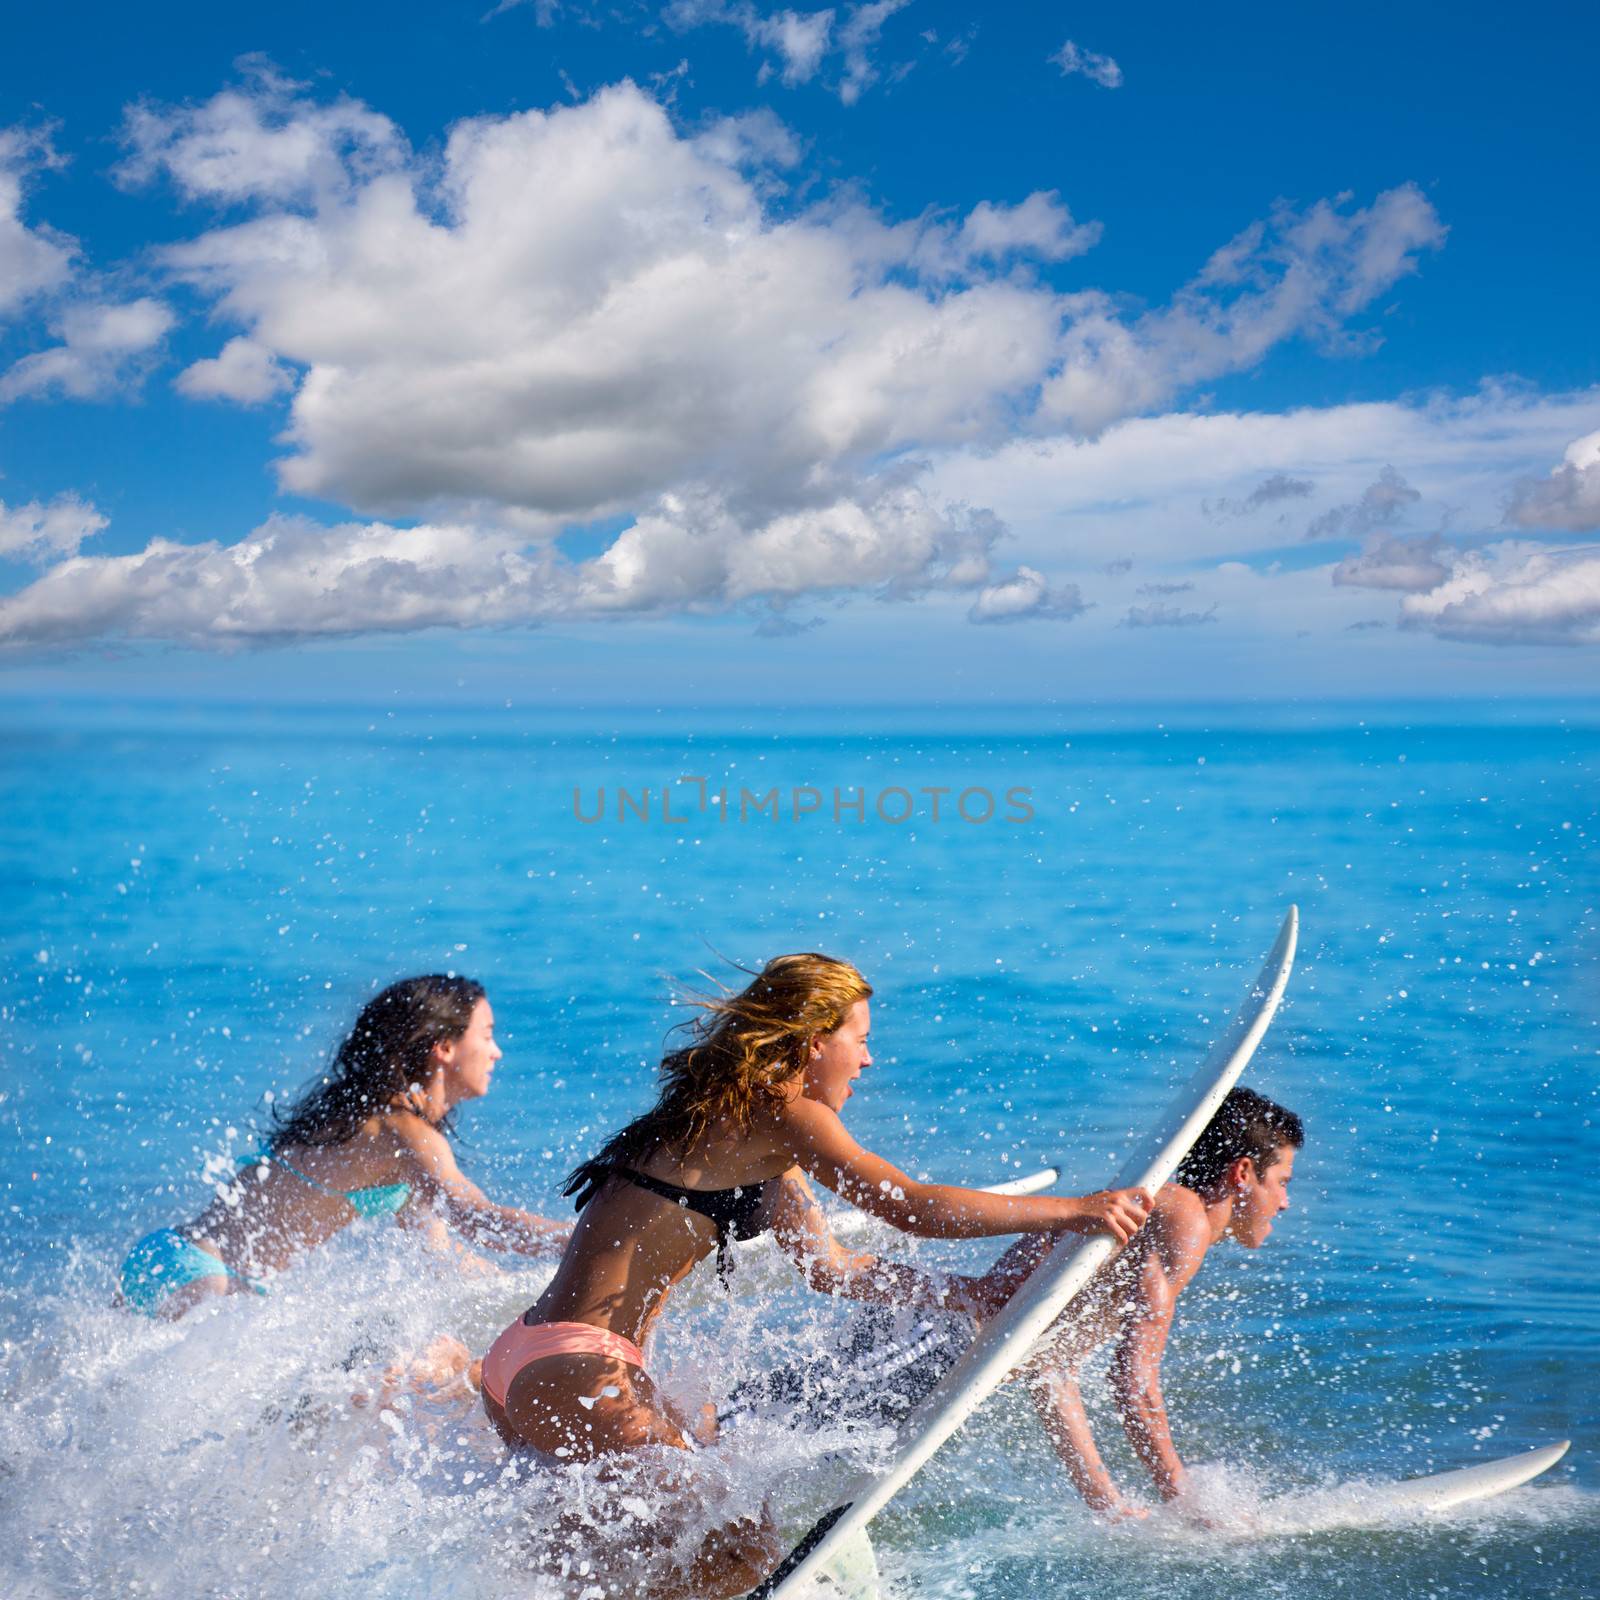 Boys and girls teen surfers surfing on surfboards by lunamarina